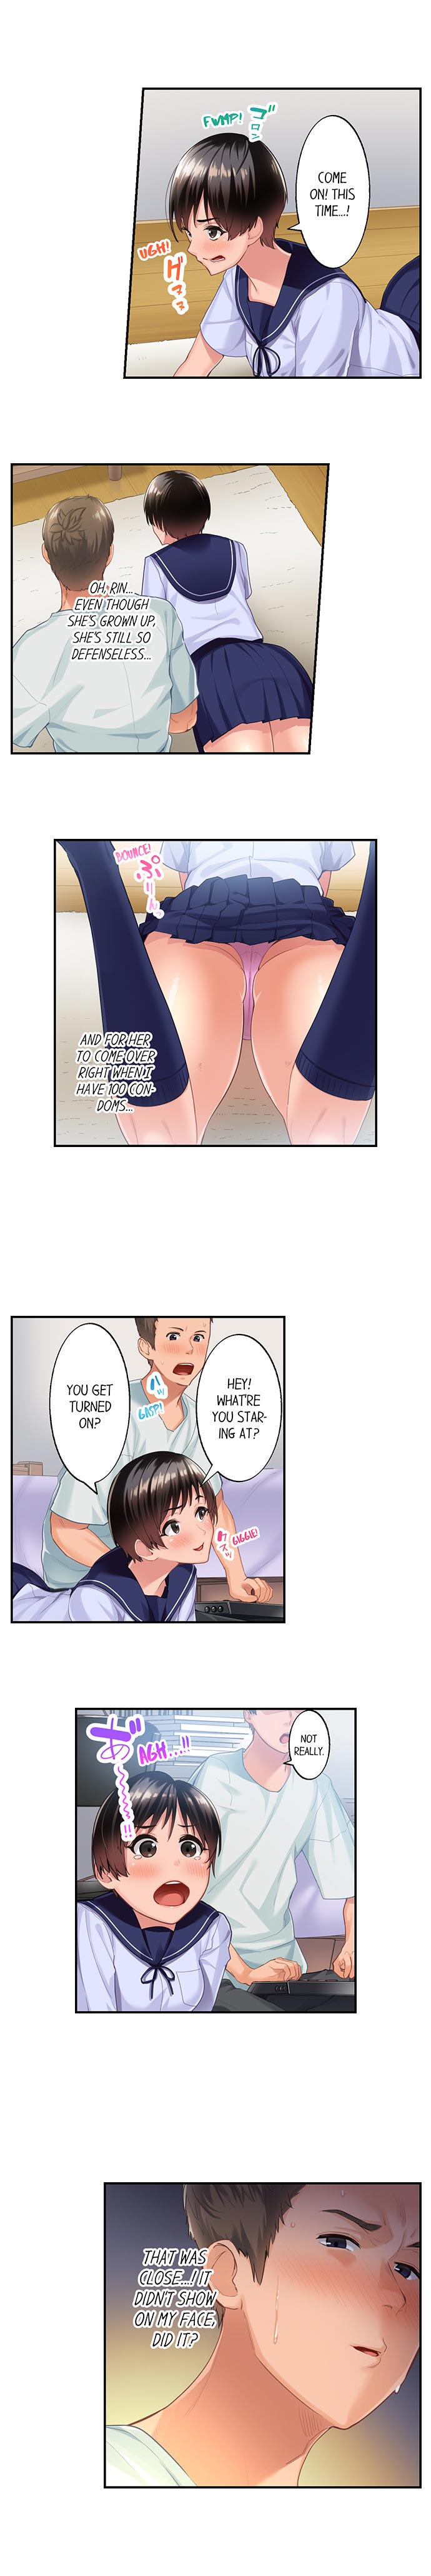 [Kayanoi Ino] Using 100 Boxes of Condoms With My Childhood Friend! (Complete) [English] - Page 5